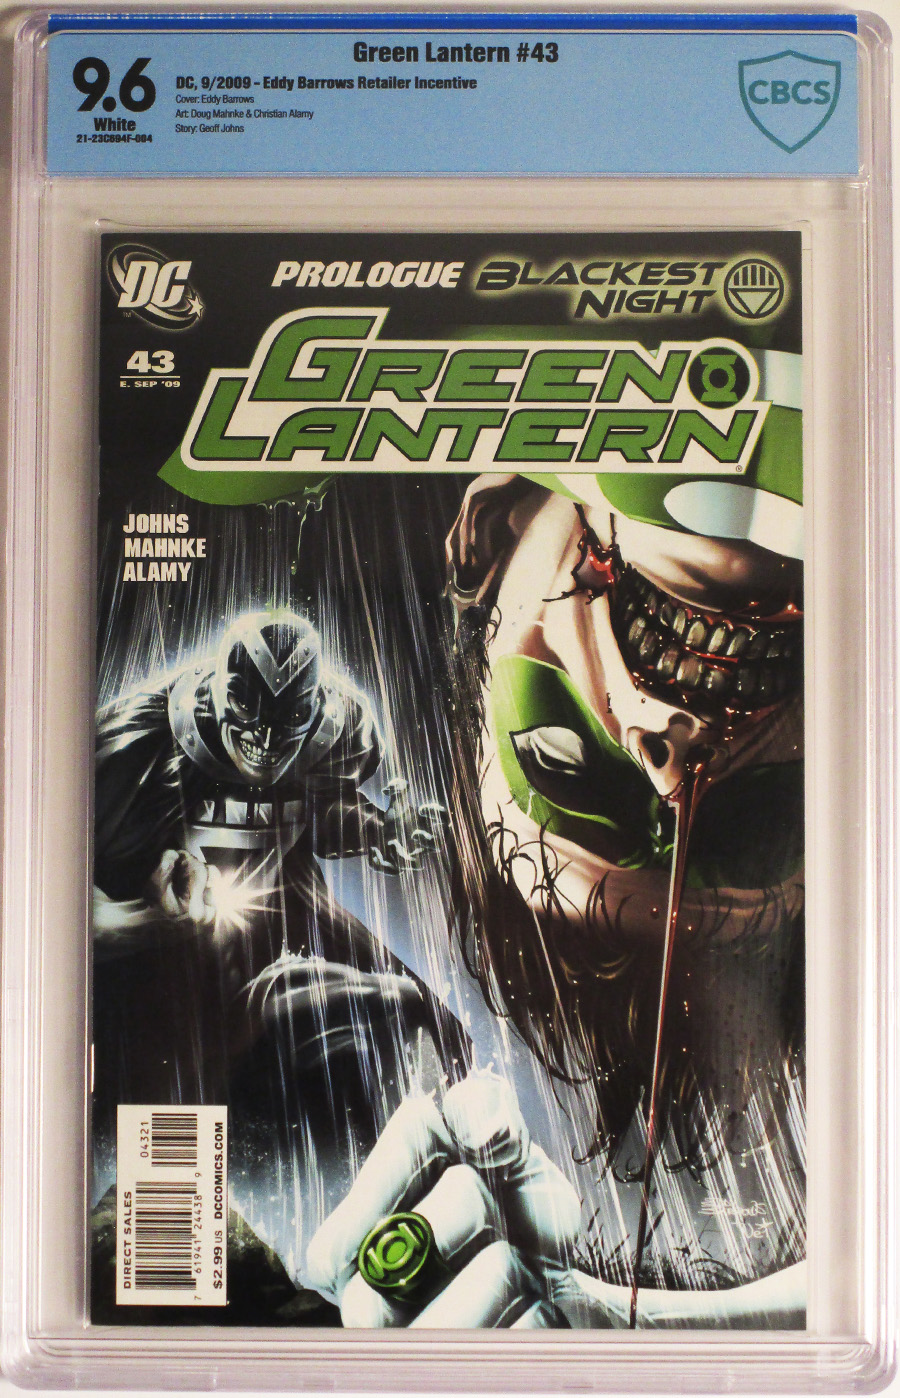 Green Lantern Vol 4 #43 Cover D CBCS 9.6  Incentive Eddy Barrows Variant Cover (Blackest Night Tie-In)